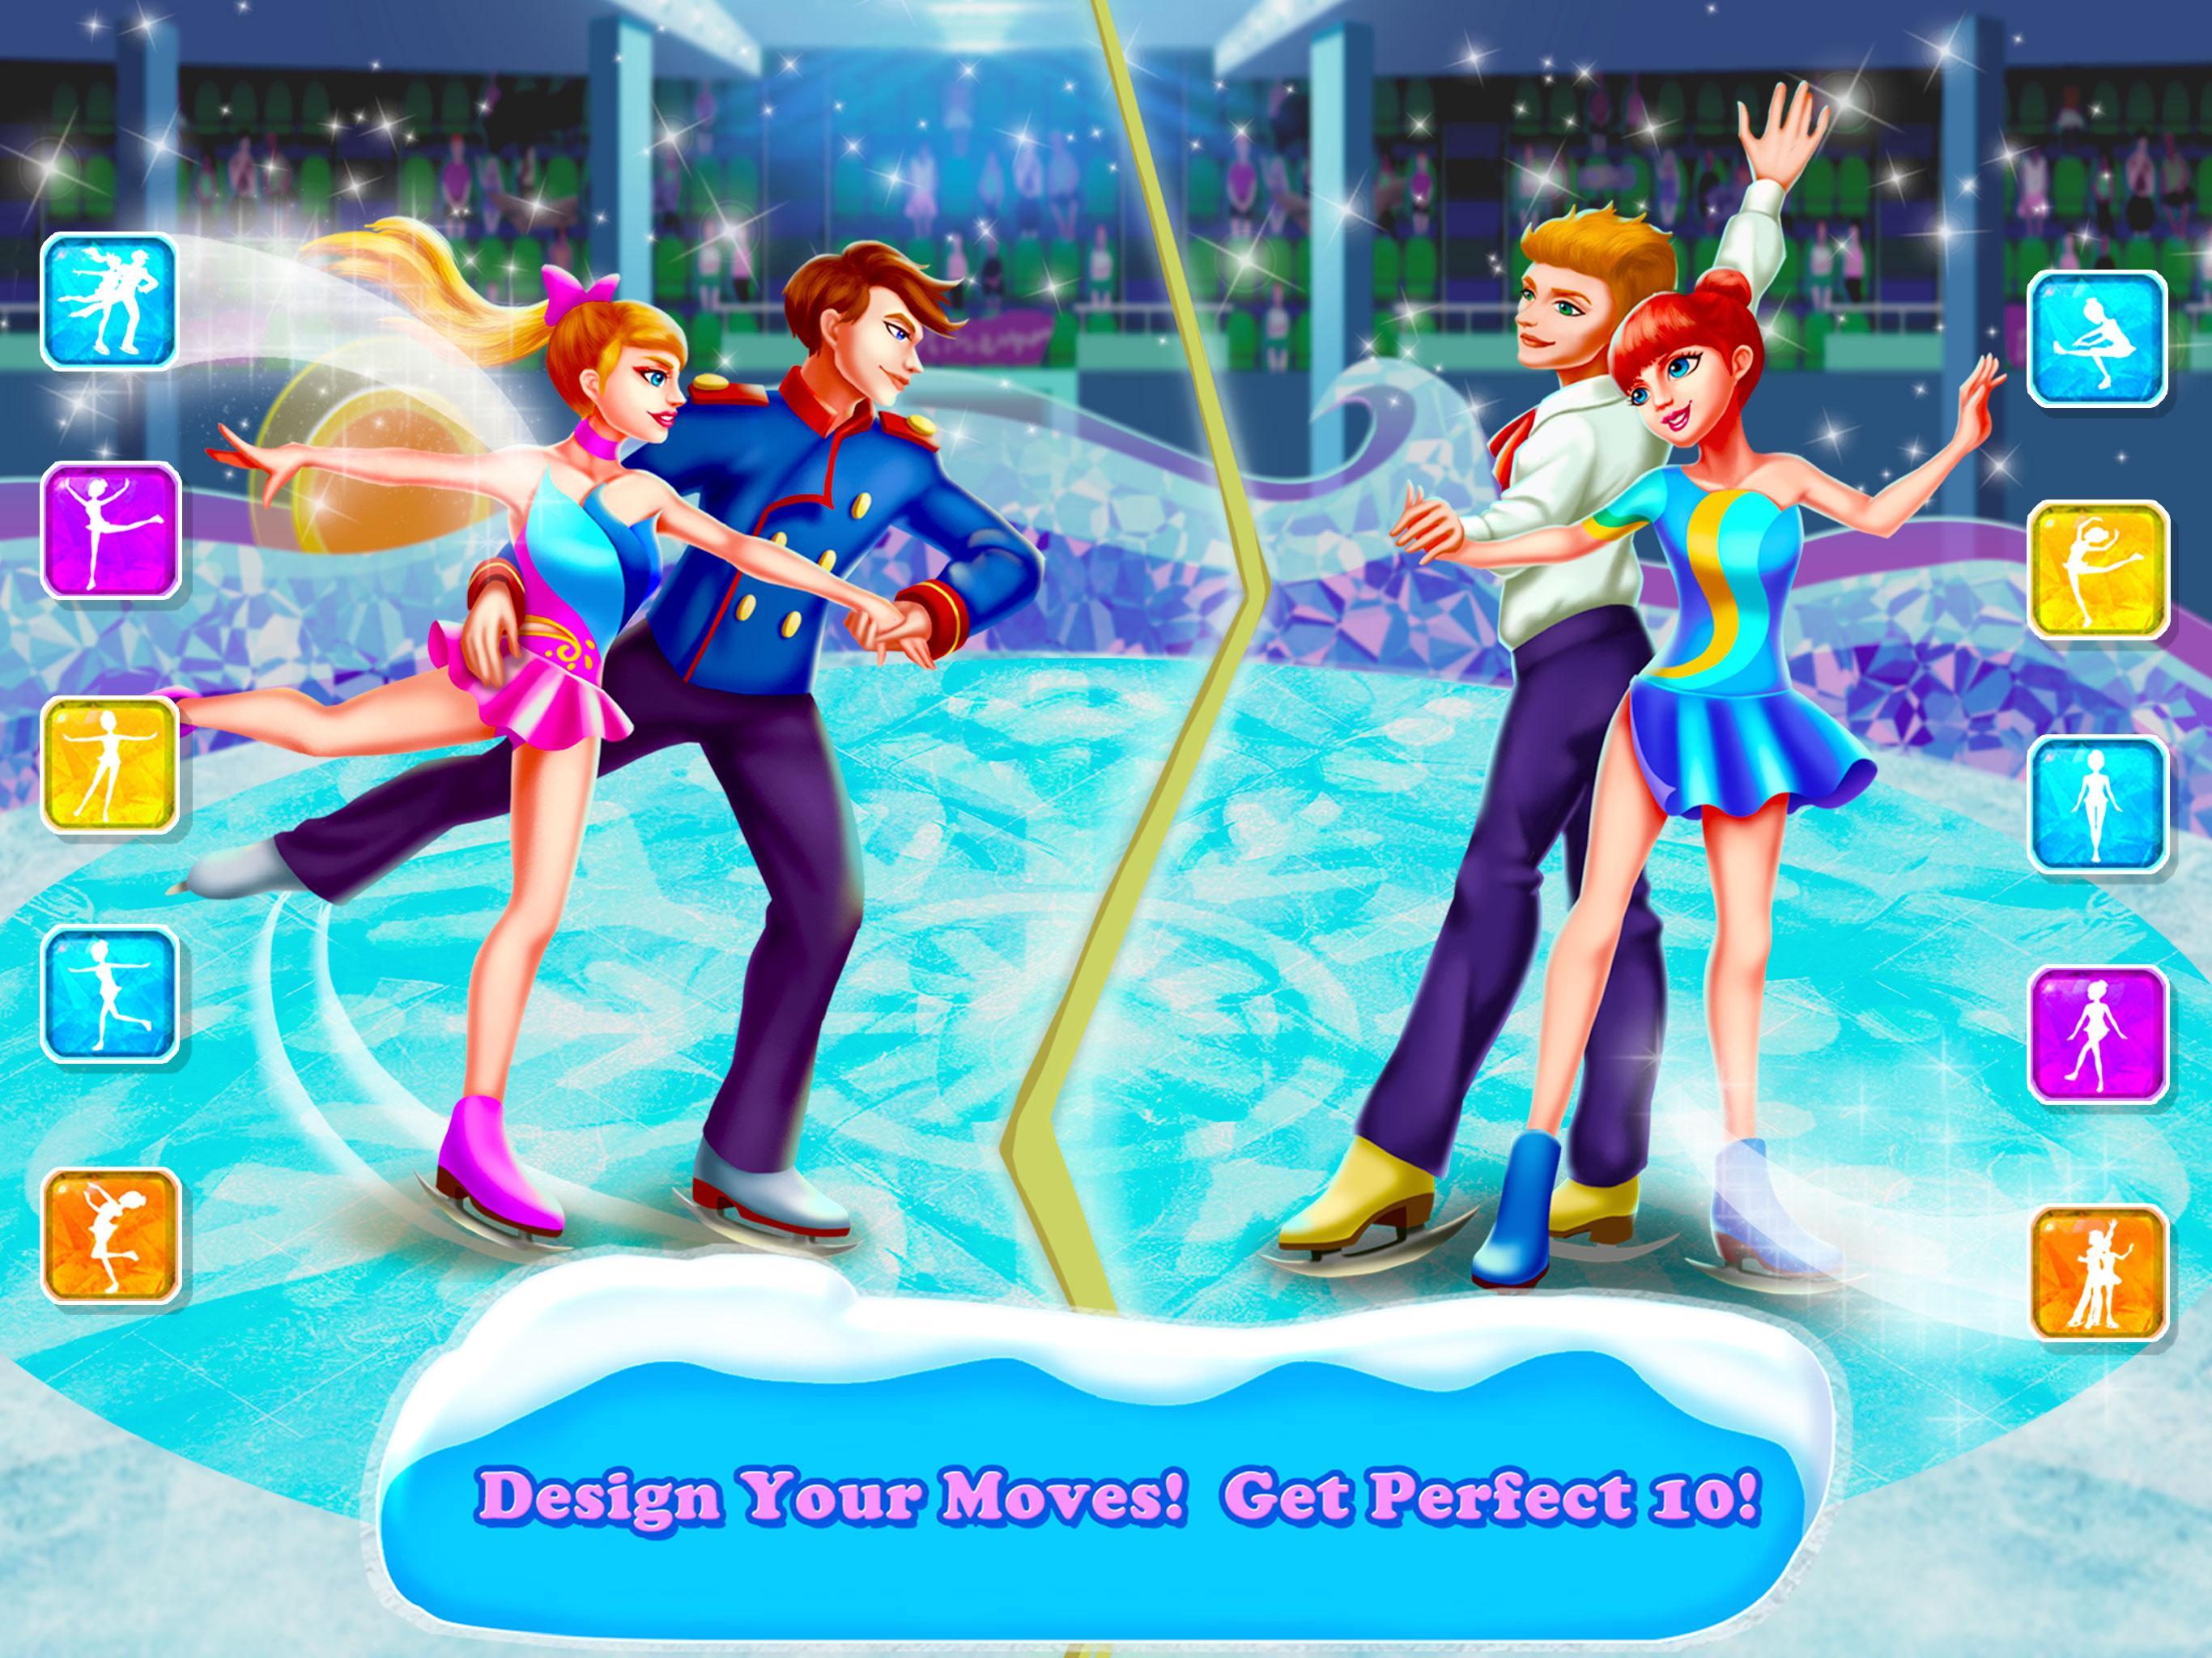 Ice Skating Ballerina: Winter Ballet Dance for Android - APK Download